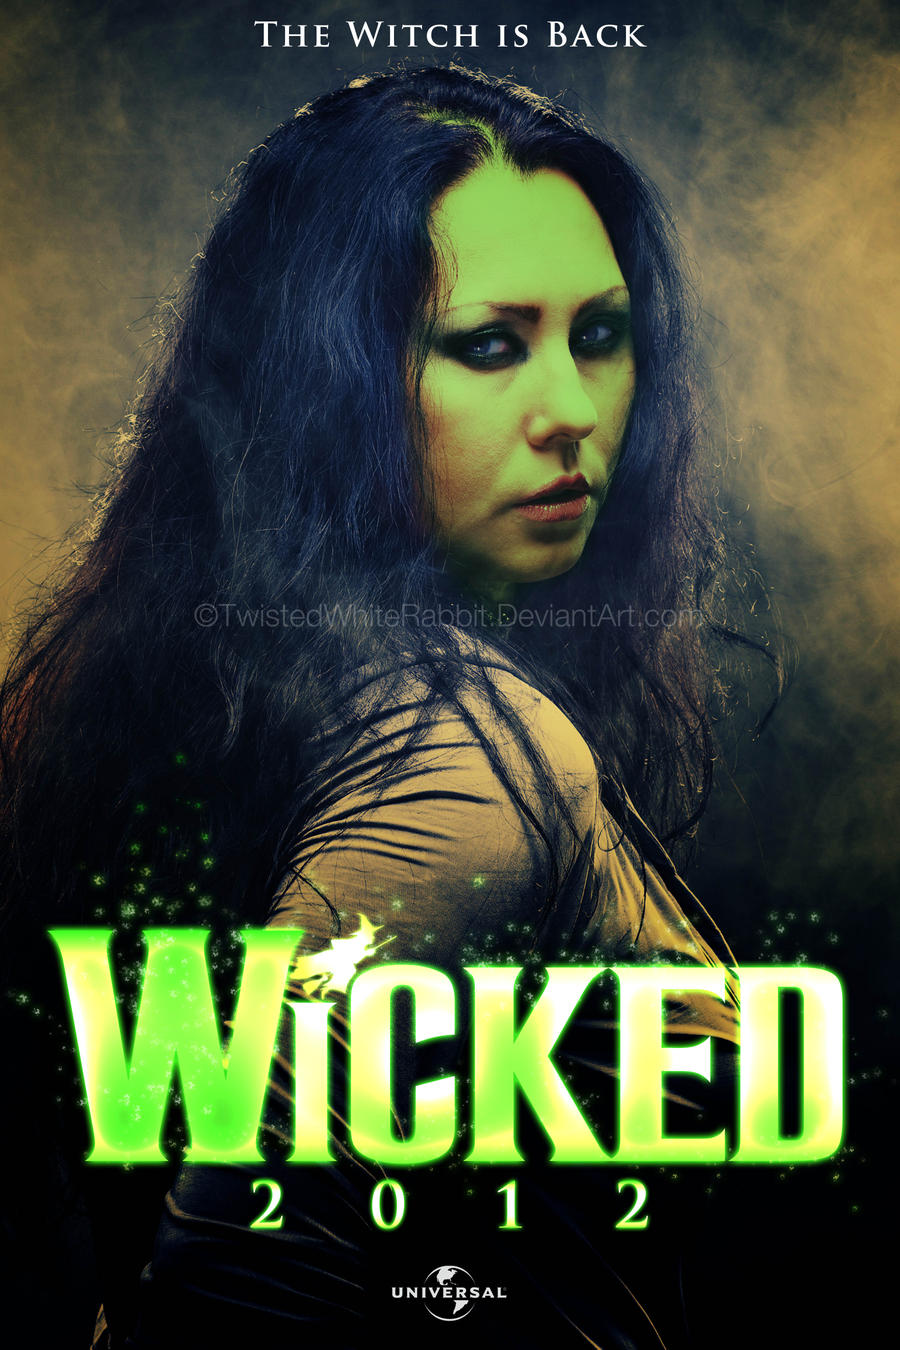 The Wicked 2014